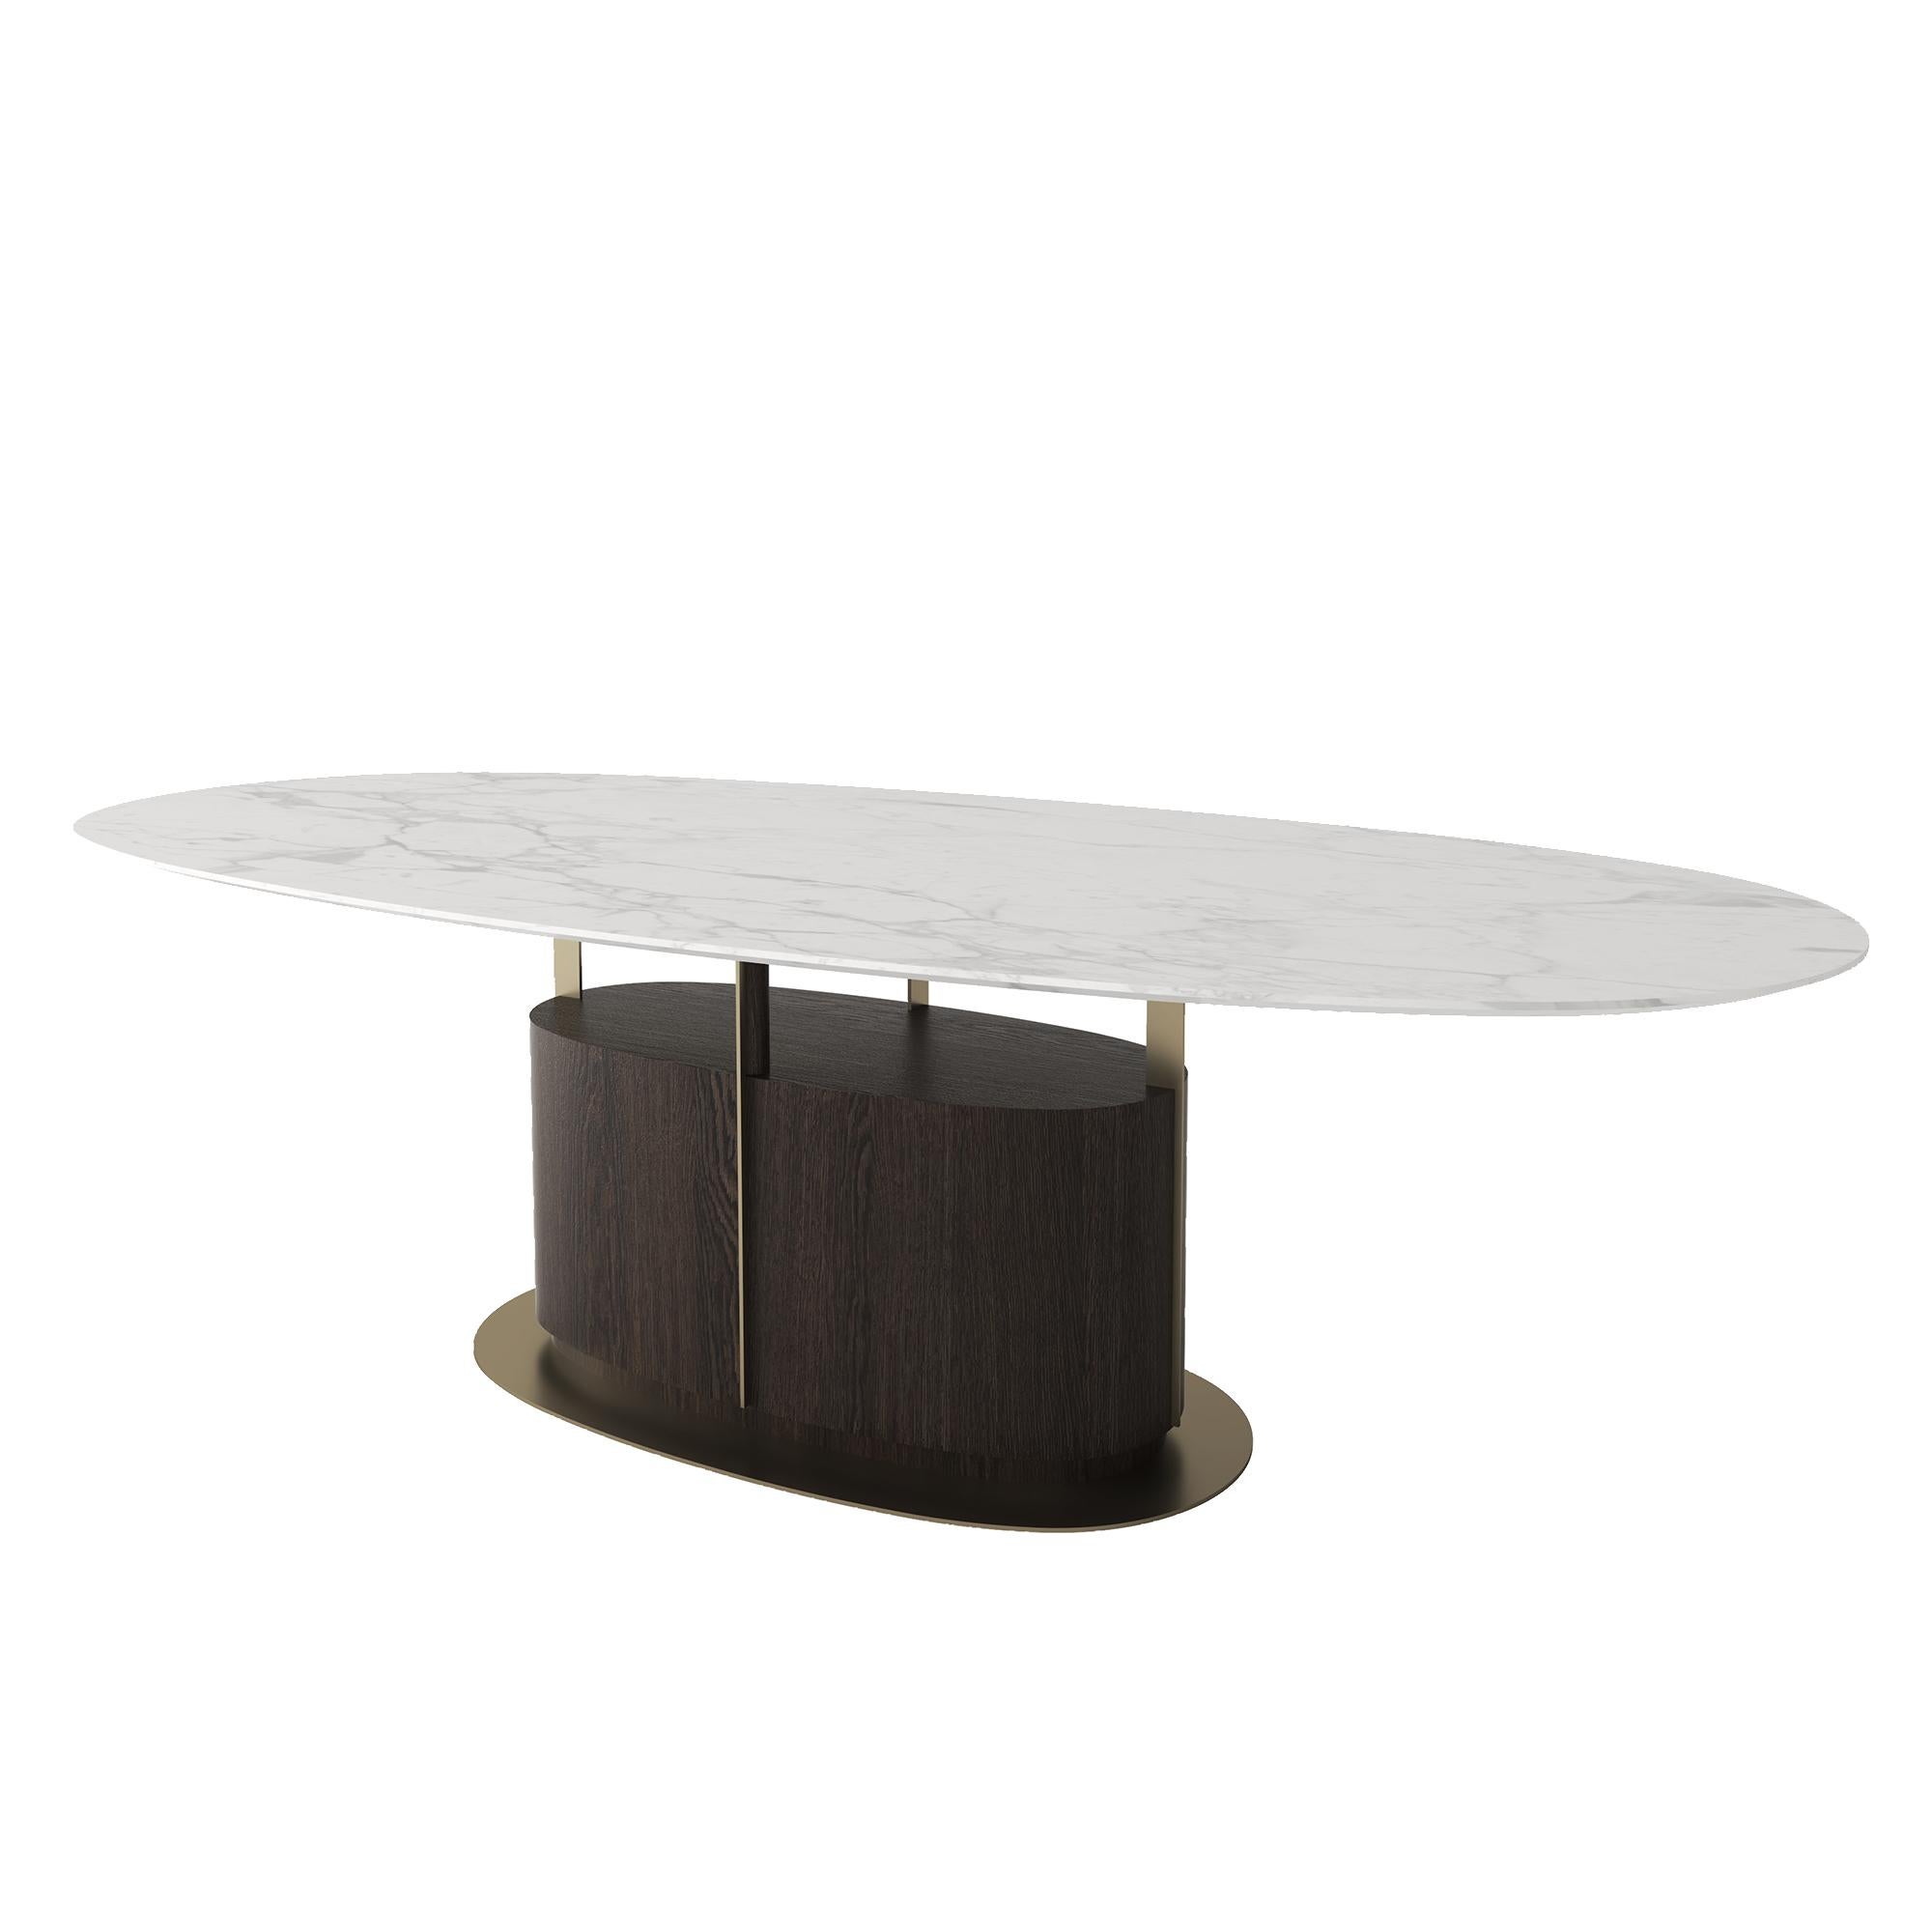 GIO dining table combines the charm of the classic materials with the modern lines.
The tabletop made of marble and its supporting structure made of brass and wood.
Available in different size and materials.
Designed by Erman Bazman for Marbleous.